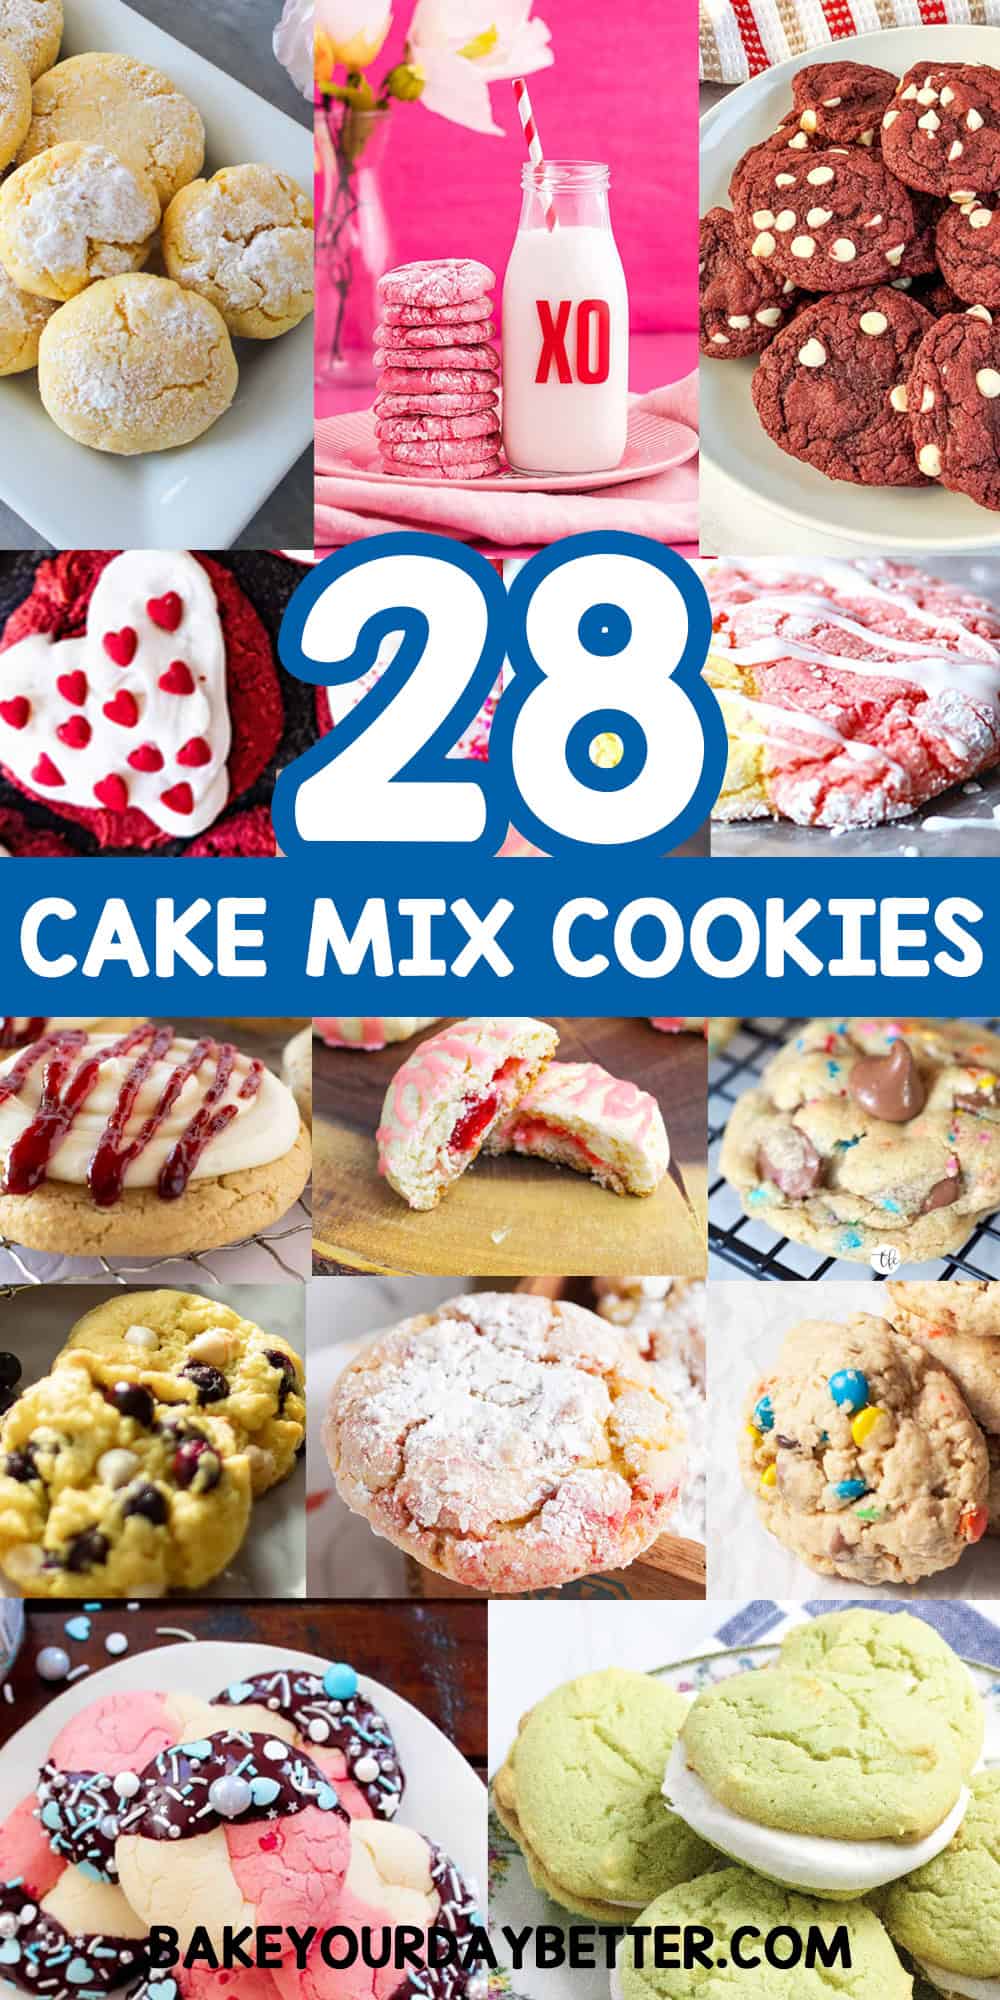 cake mix cookie pictures with text overlay that says: 28 cake mix cookies